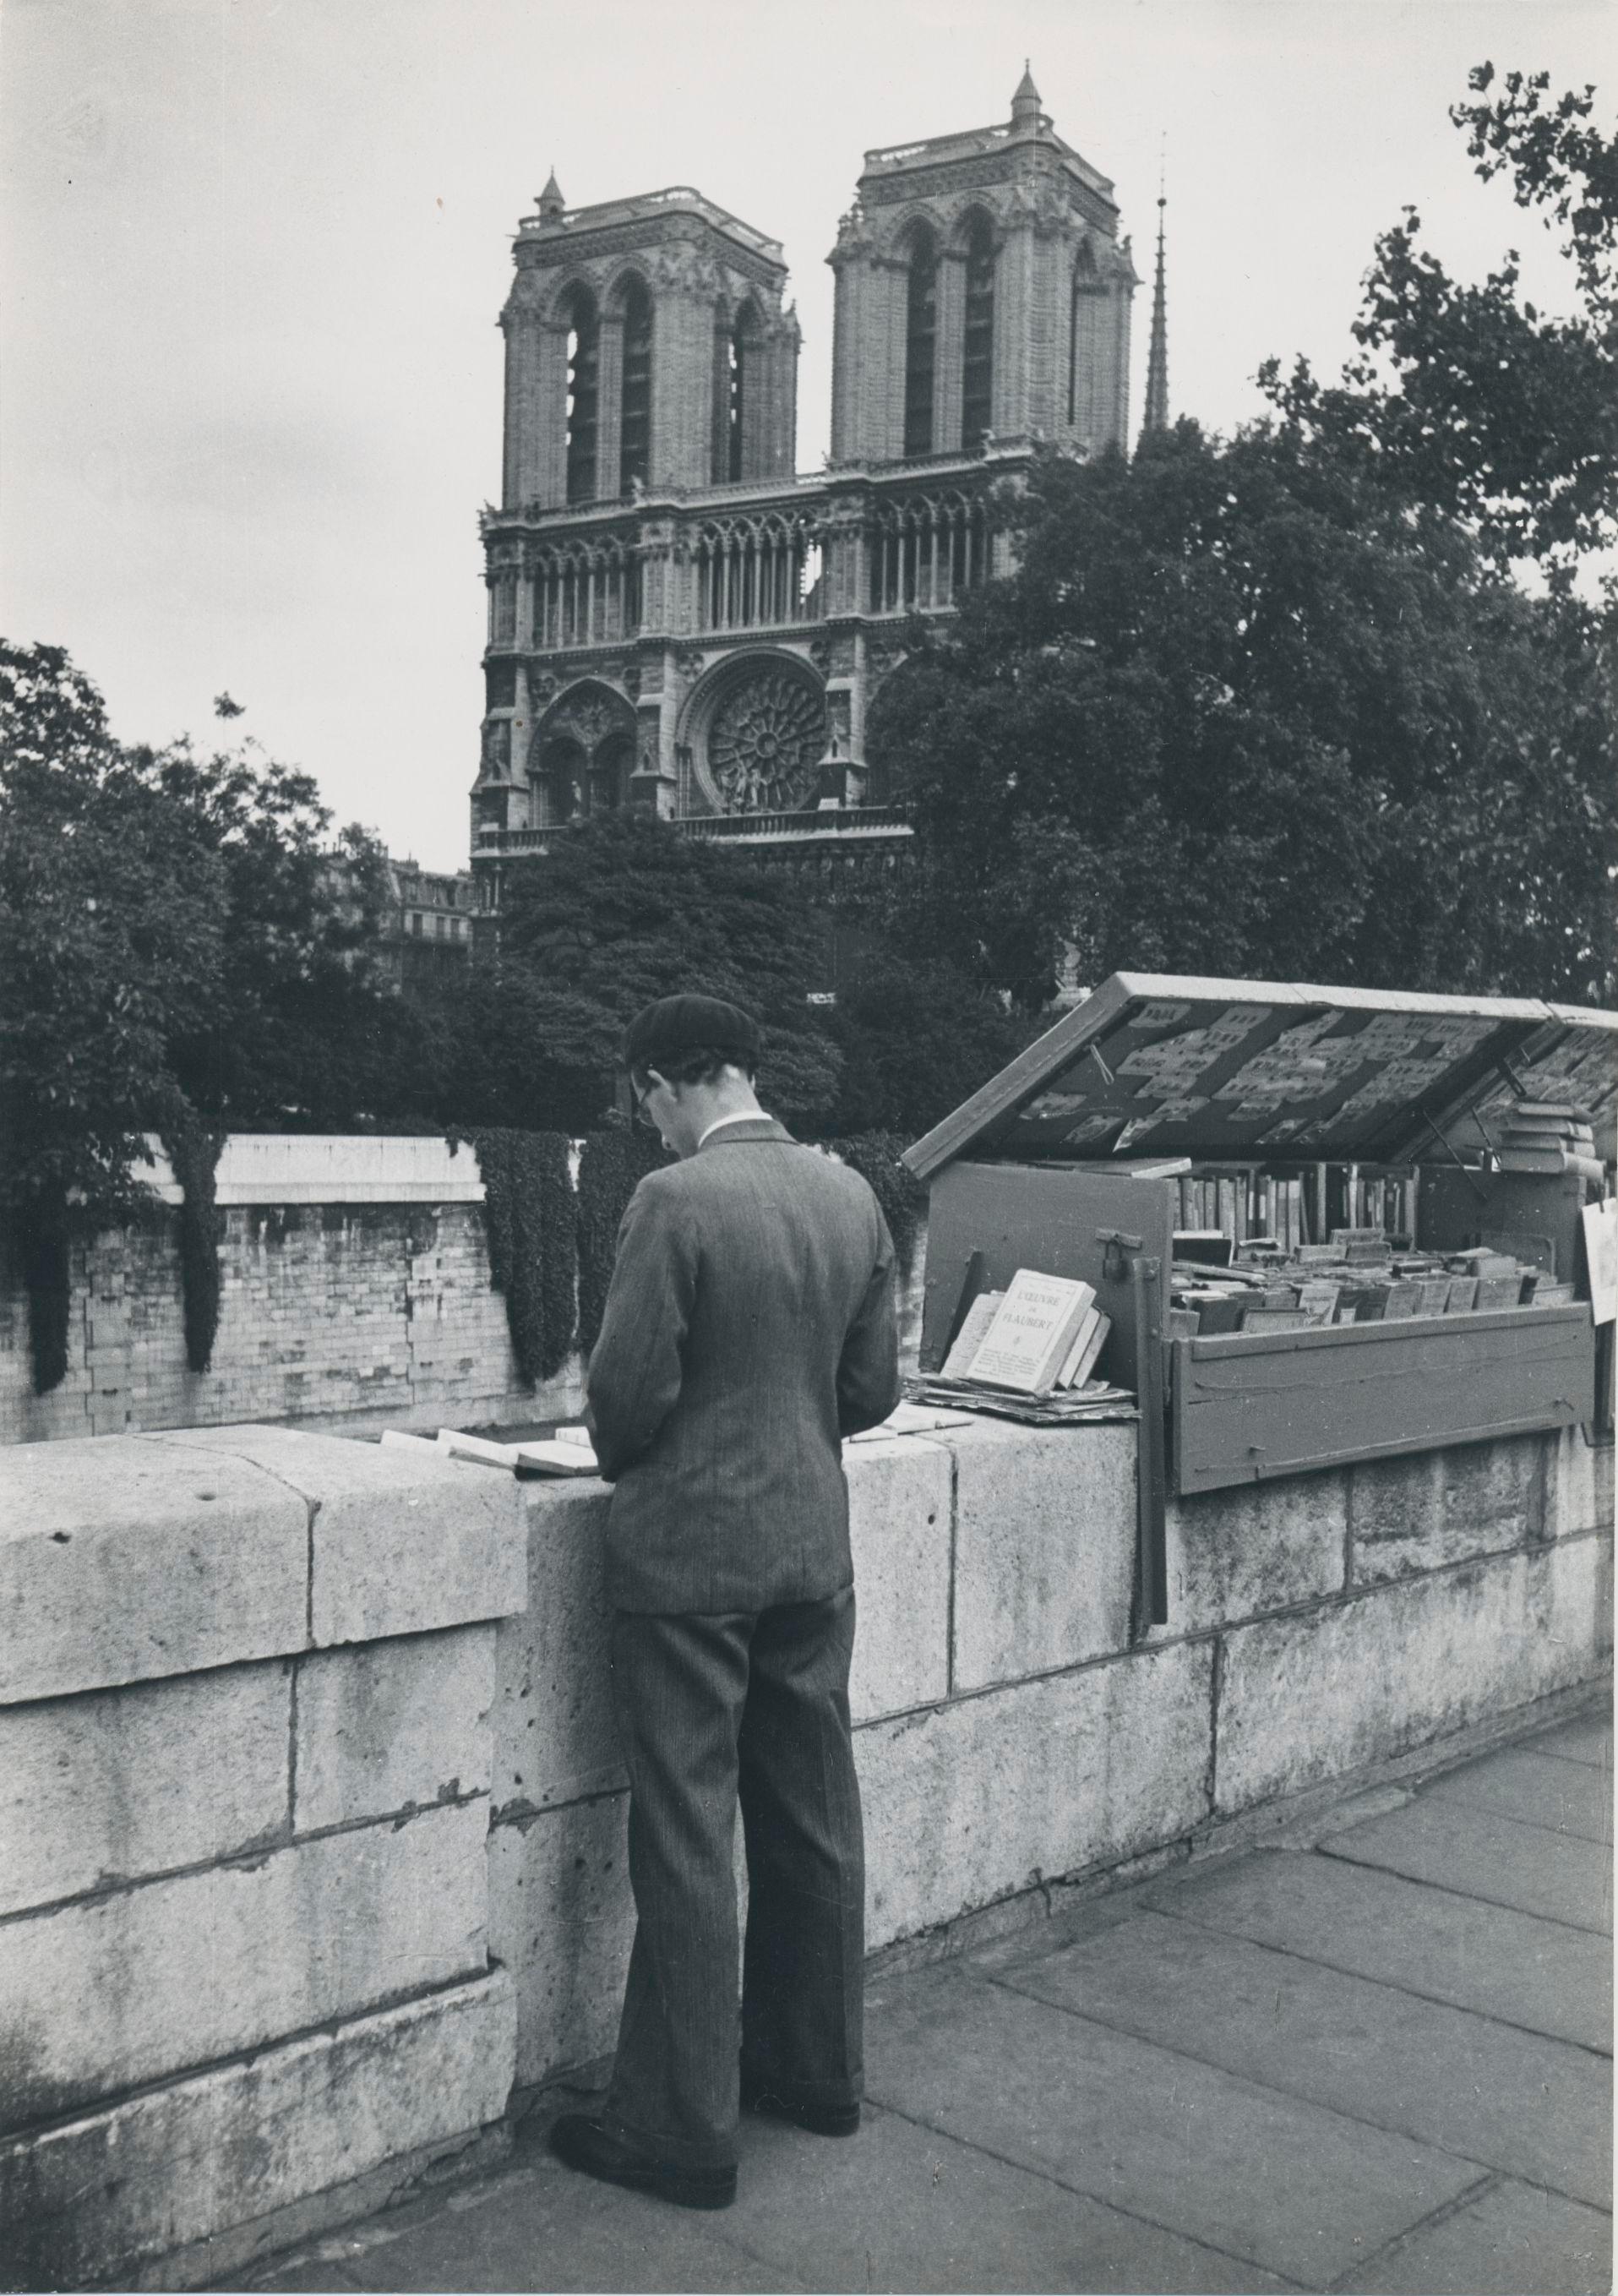 Erich Andres Black and White Photograph - Man, Notre Dam, Street Photography, Black and White, Paris, 1950s, 23 x 16, 2 cm